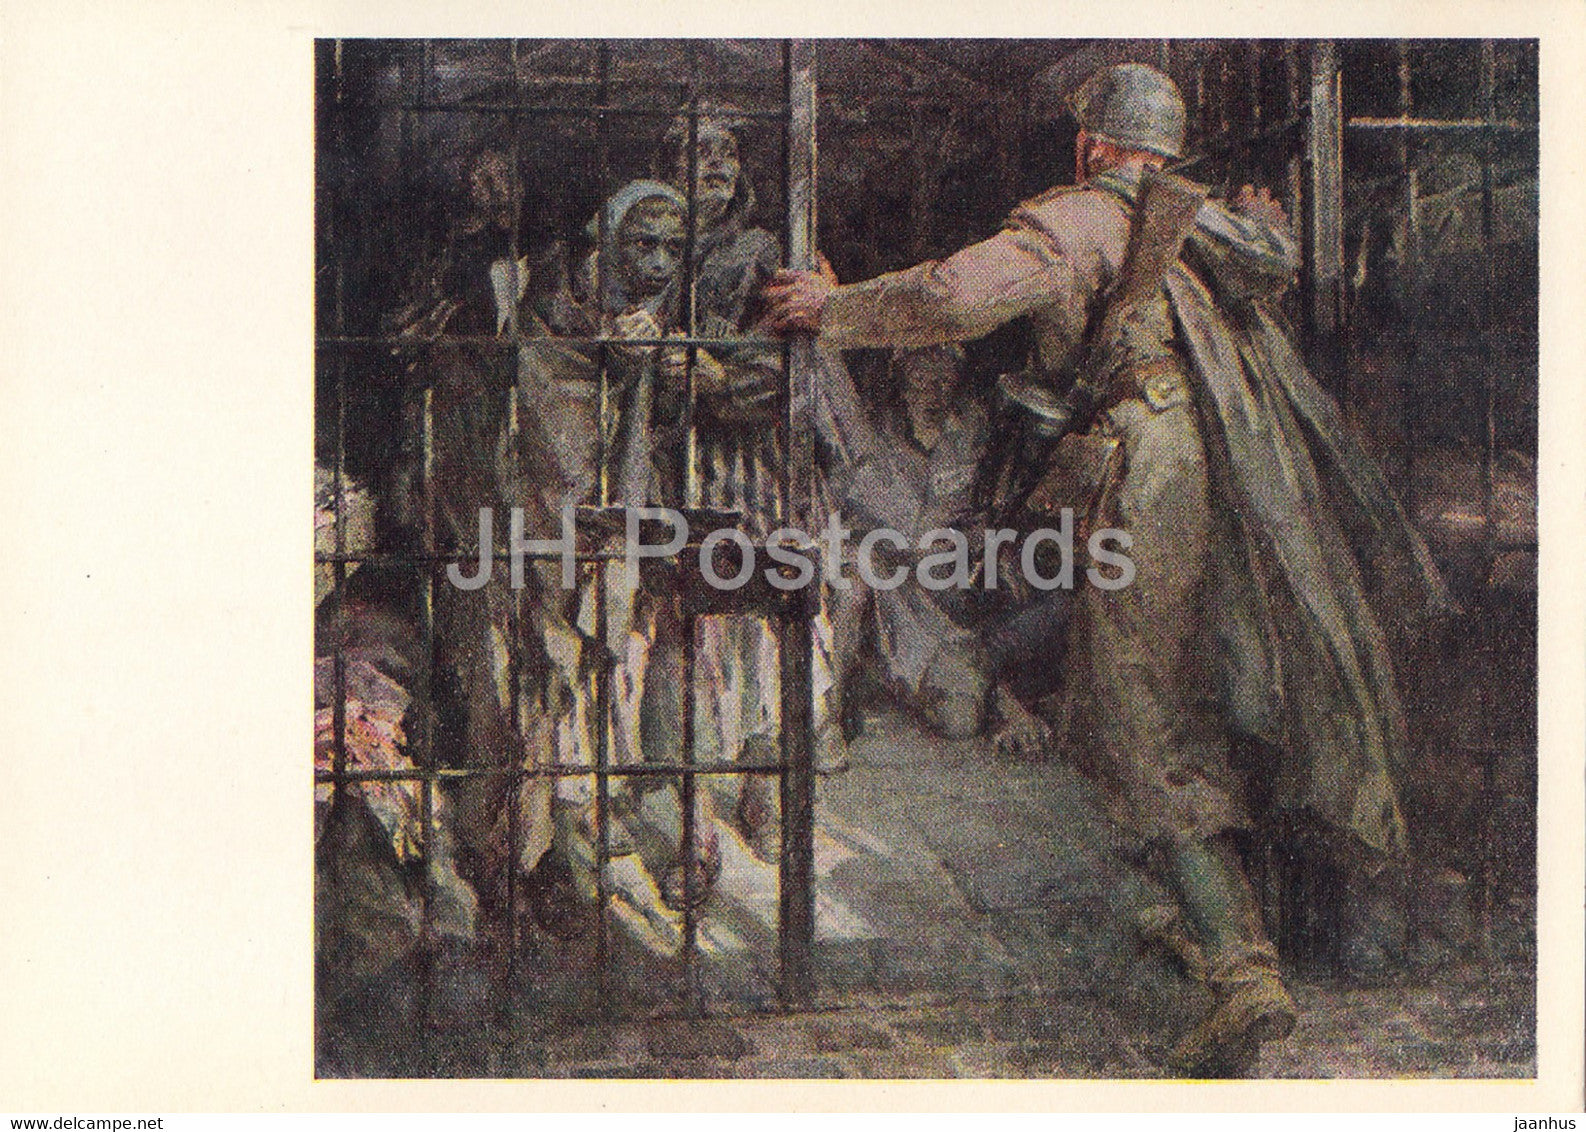 Guarding the World - painting by M. Khmelko - Freedom soldier - military - art - 1965 - Russia USSR - unused - JH Postcards